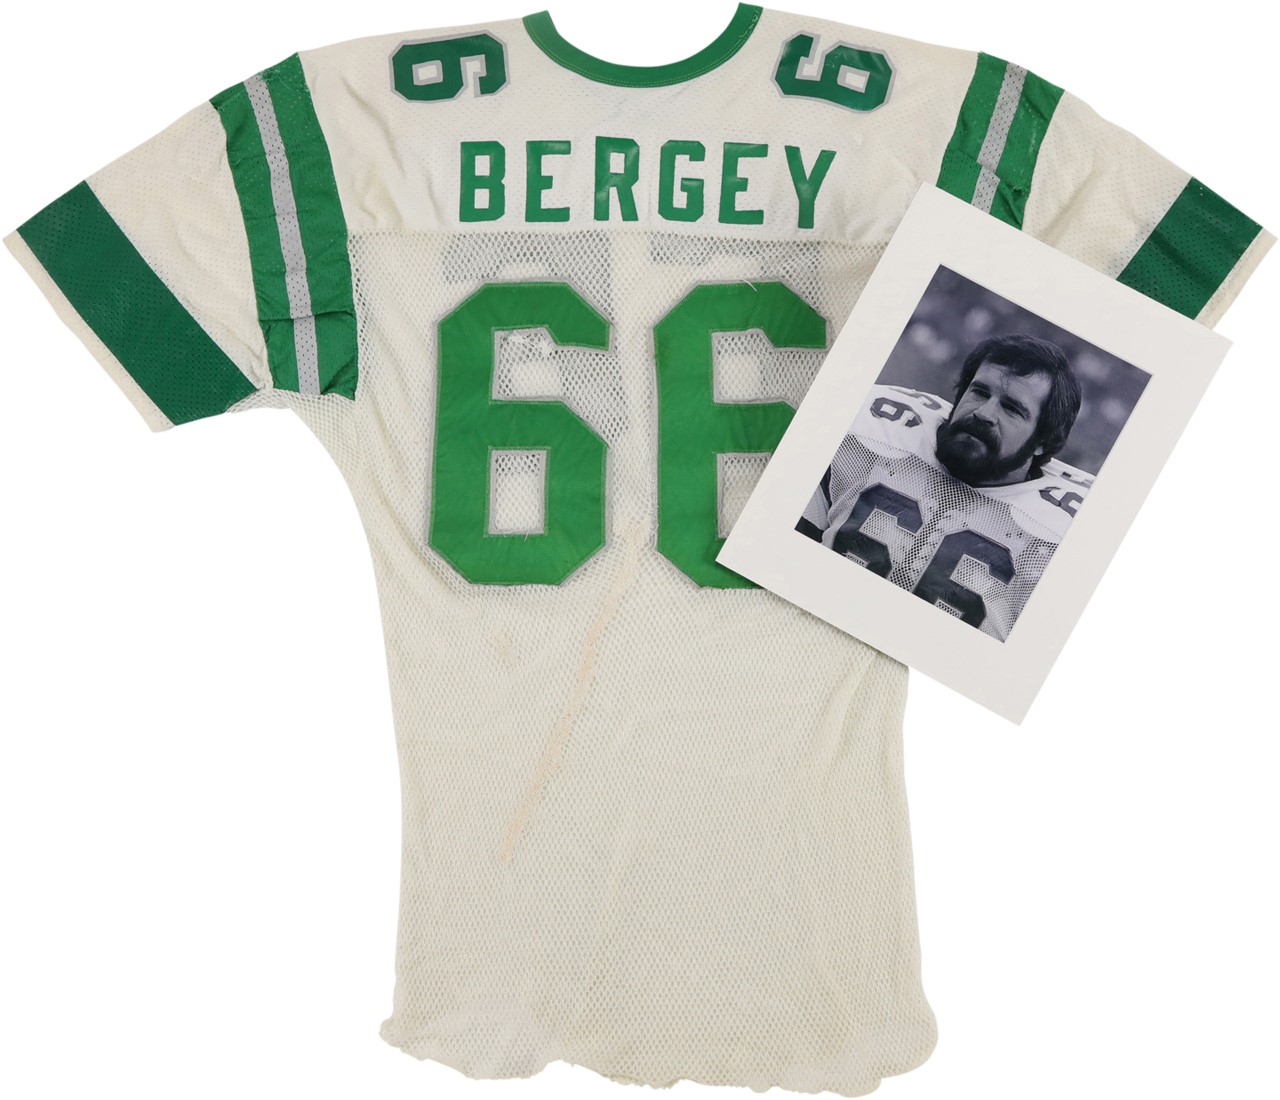 The Philadelphia Eagles Collection - Circa 1977 Bill Bergey Philadelphia Eagles Game Worn Jersey (Photo-Matched)